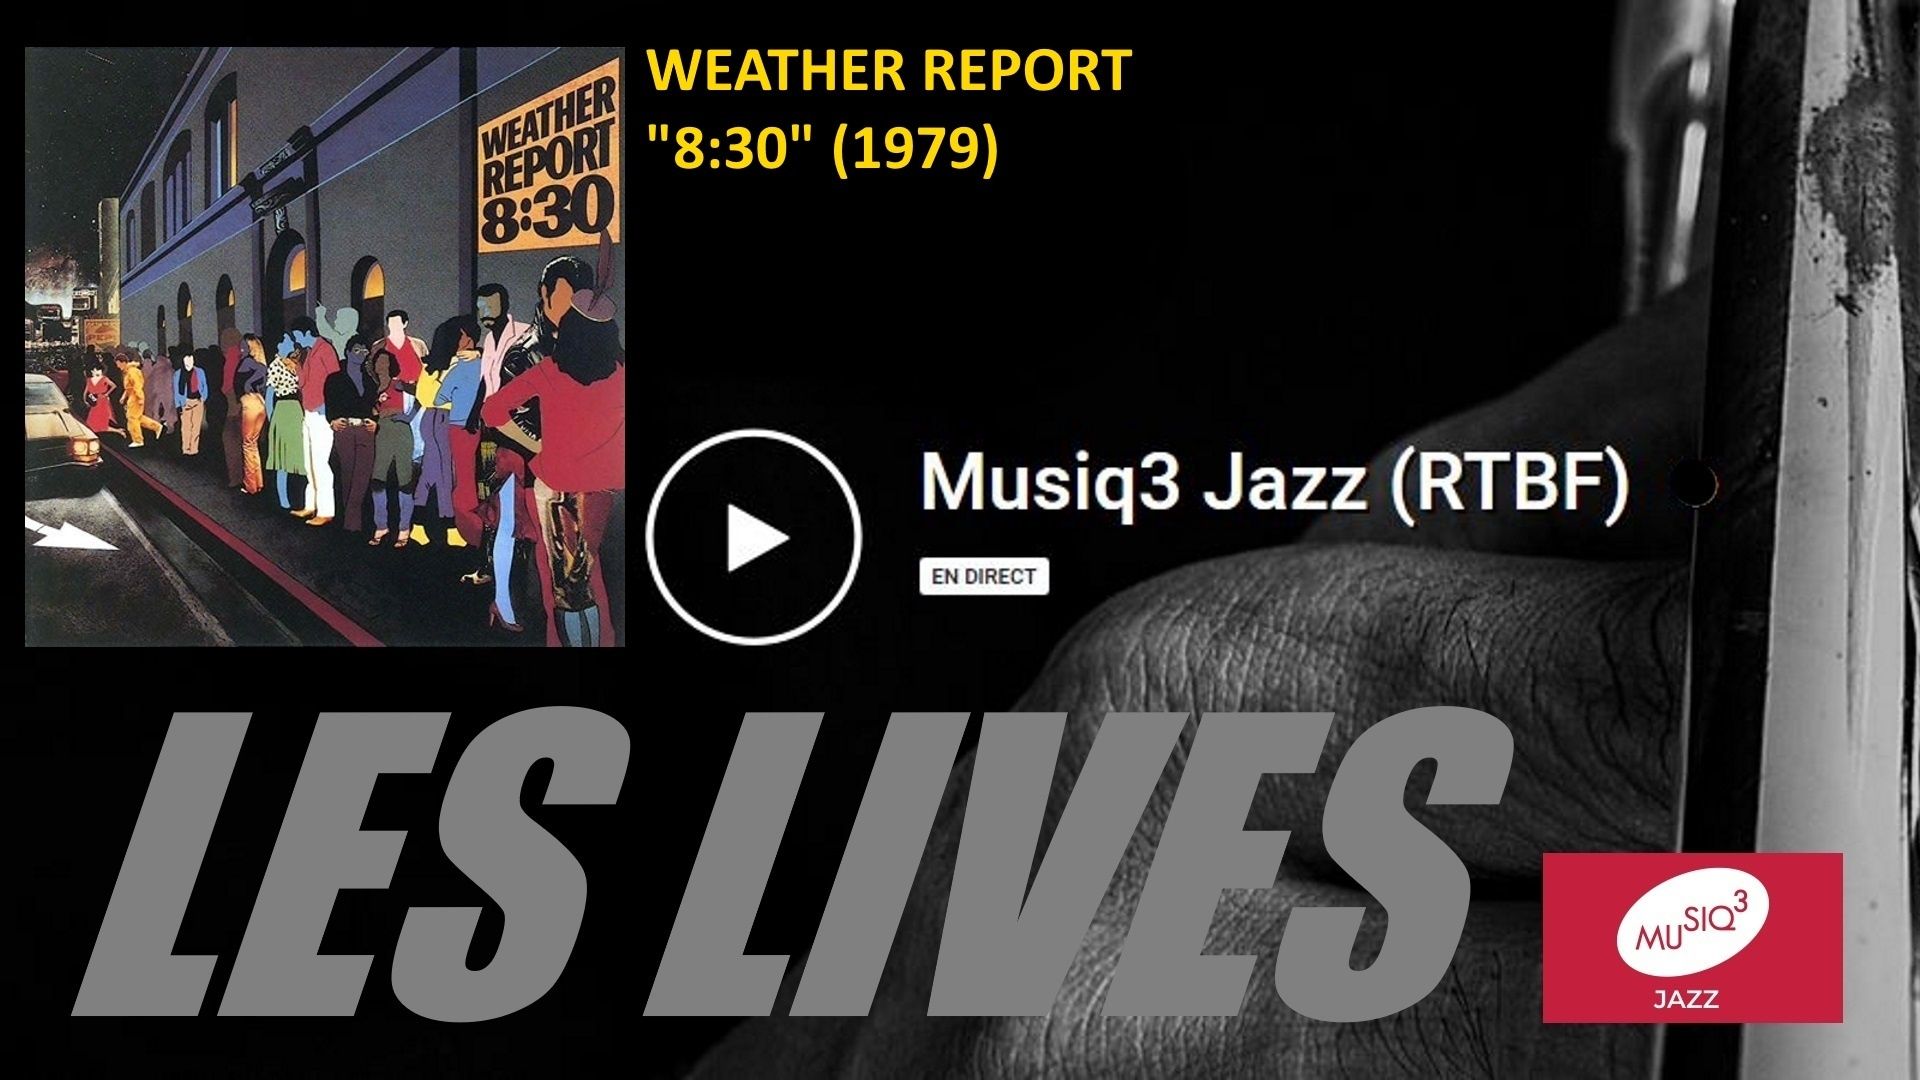 Les lives : Weather Report ("8:30", 1979)